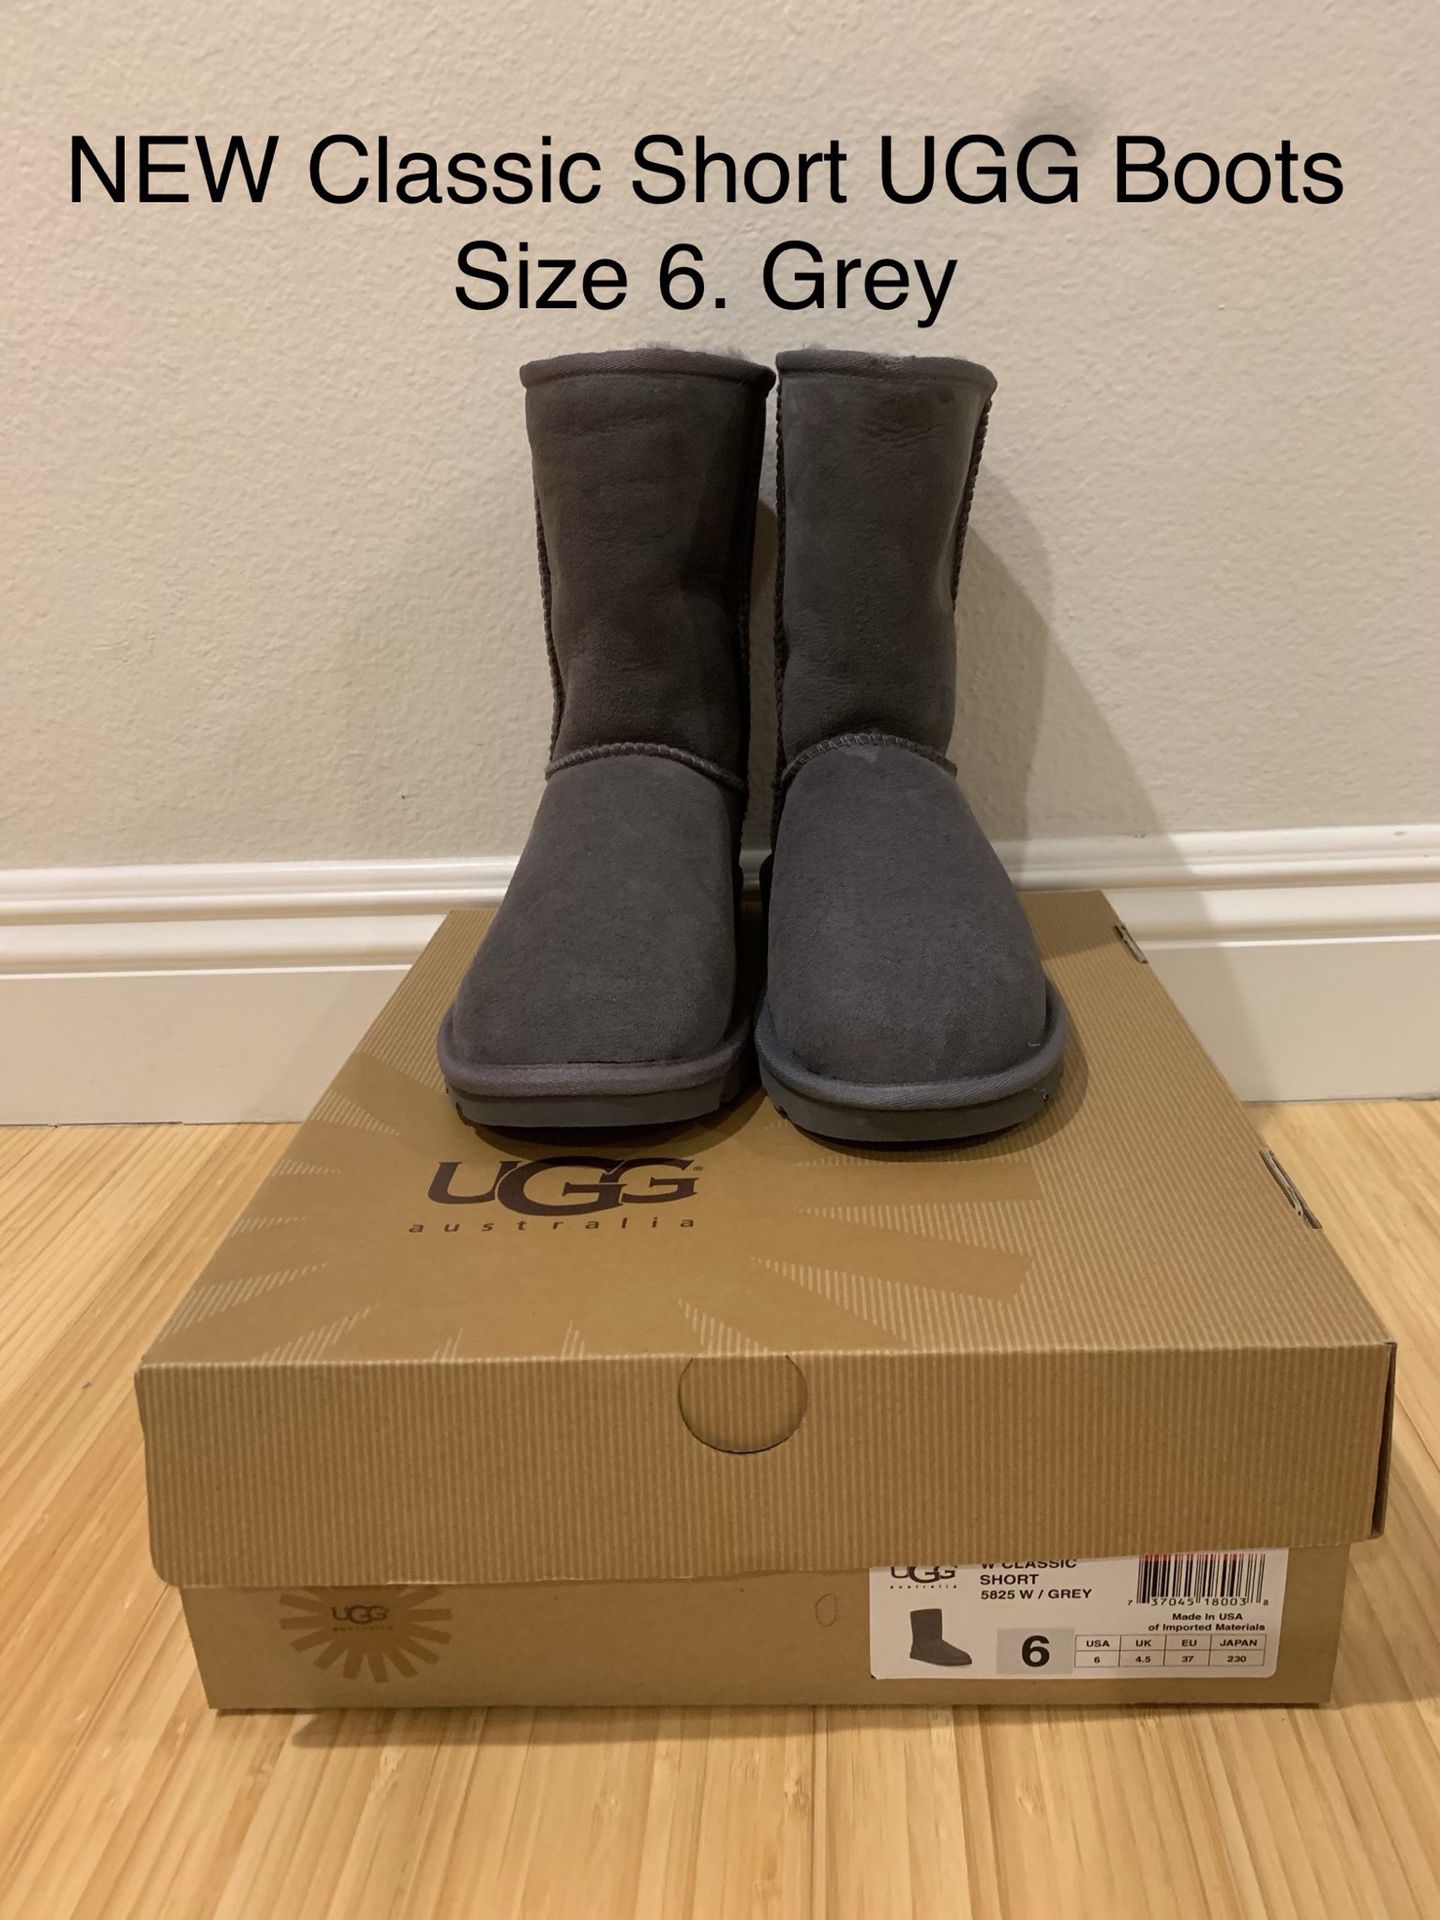 NEW Classic Short UGG Boots. Size 6. Grey